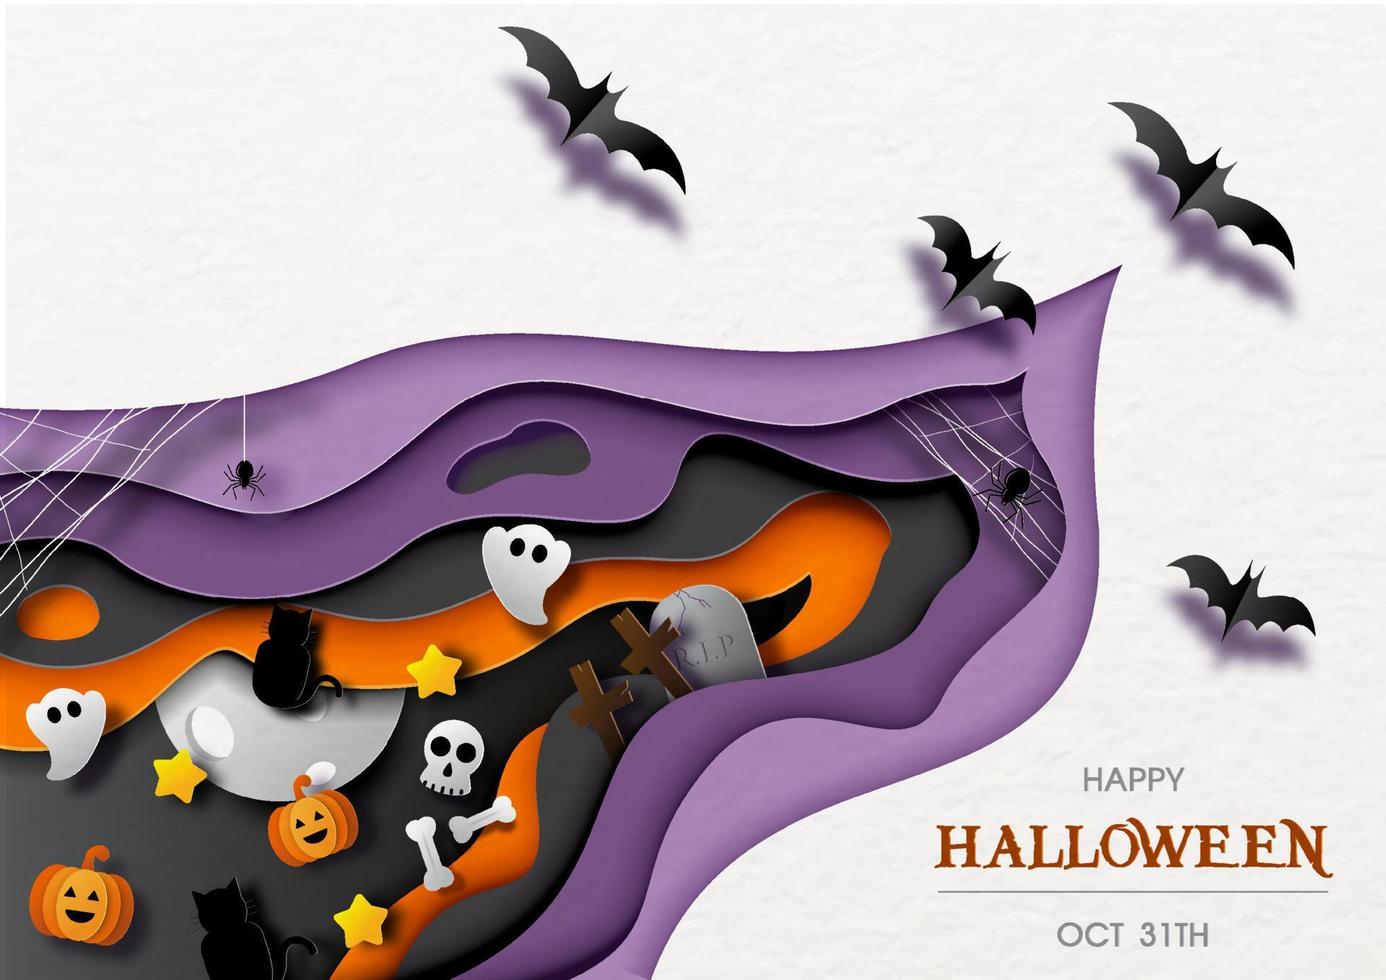 Object of Halloween symbol in abstract pattern and paper cut style with bats flying and Happy Halloween lettering on white paper pattern background. vector